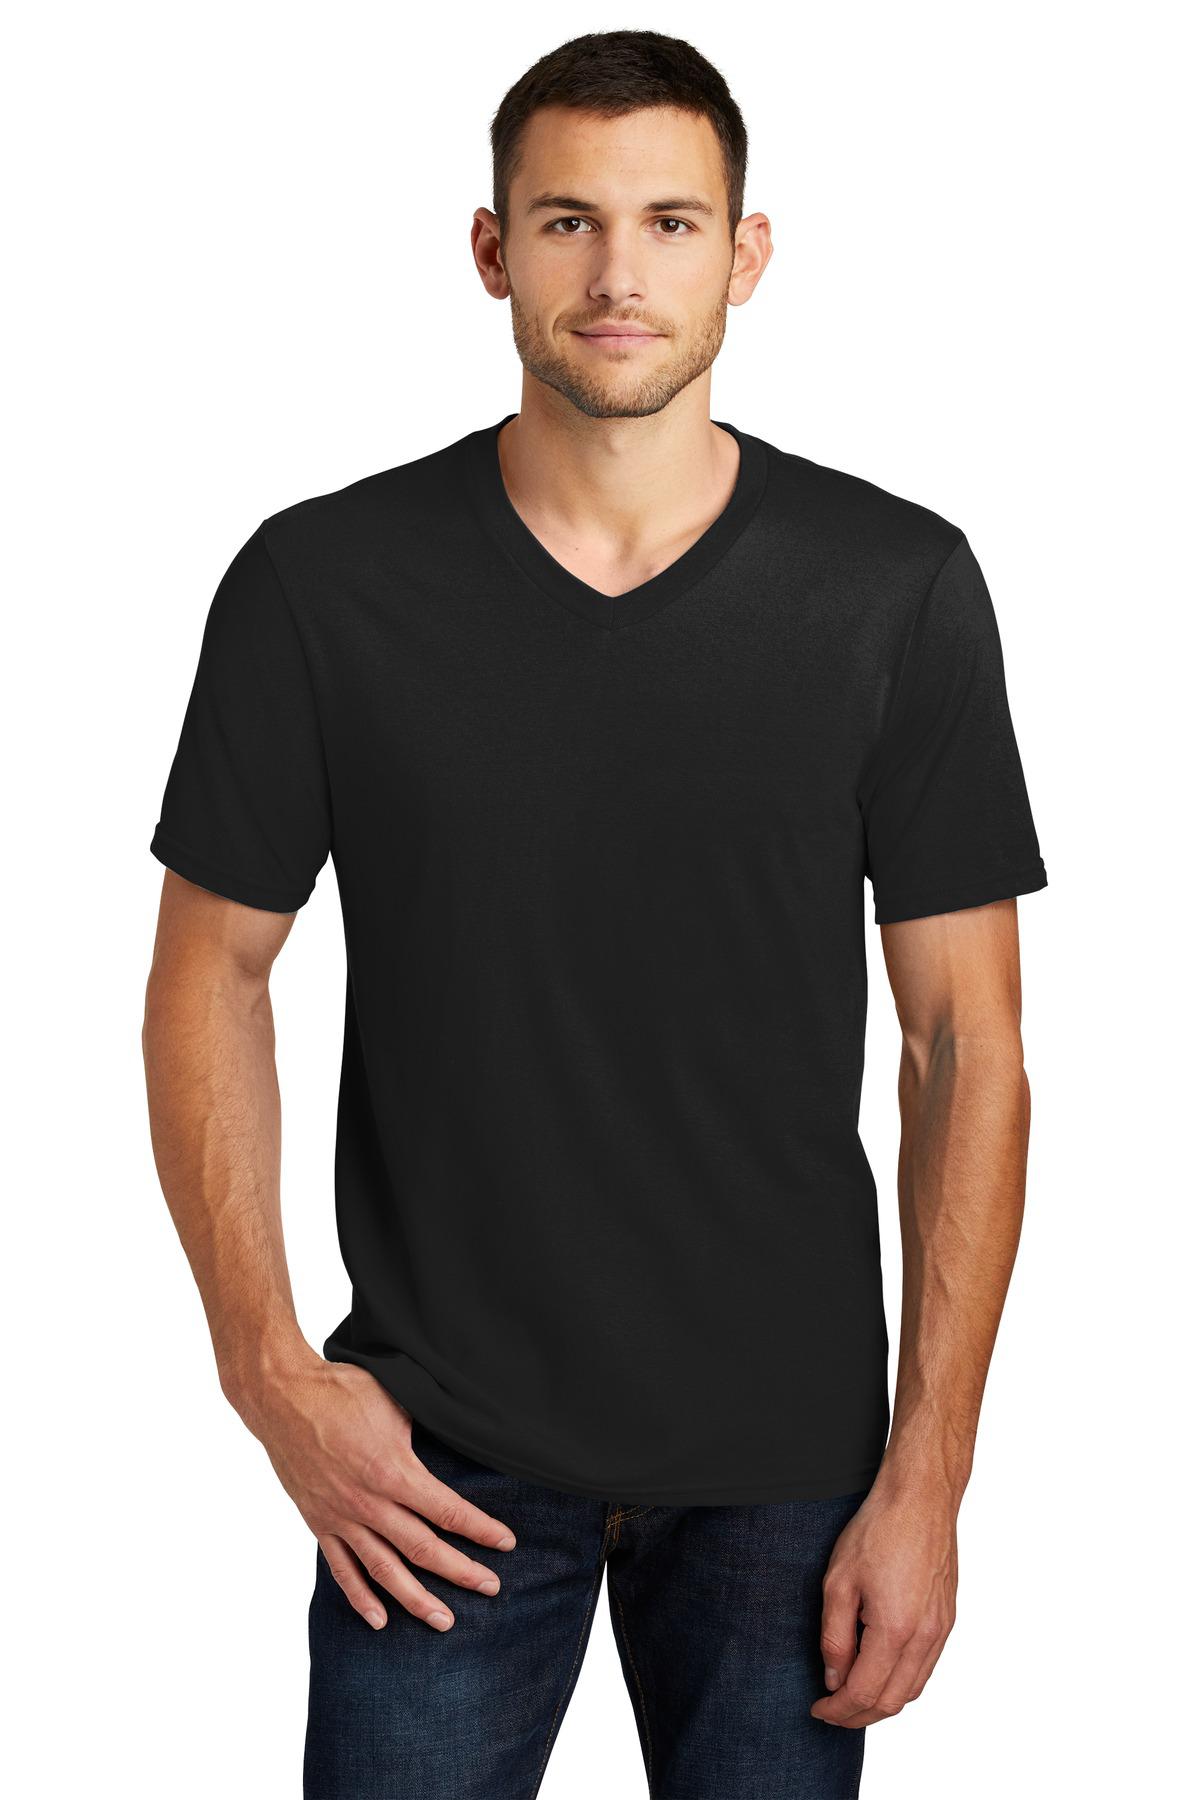 District DT6500 Very Important Tee V-Neck - Shirtmax